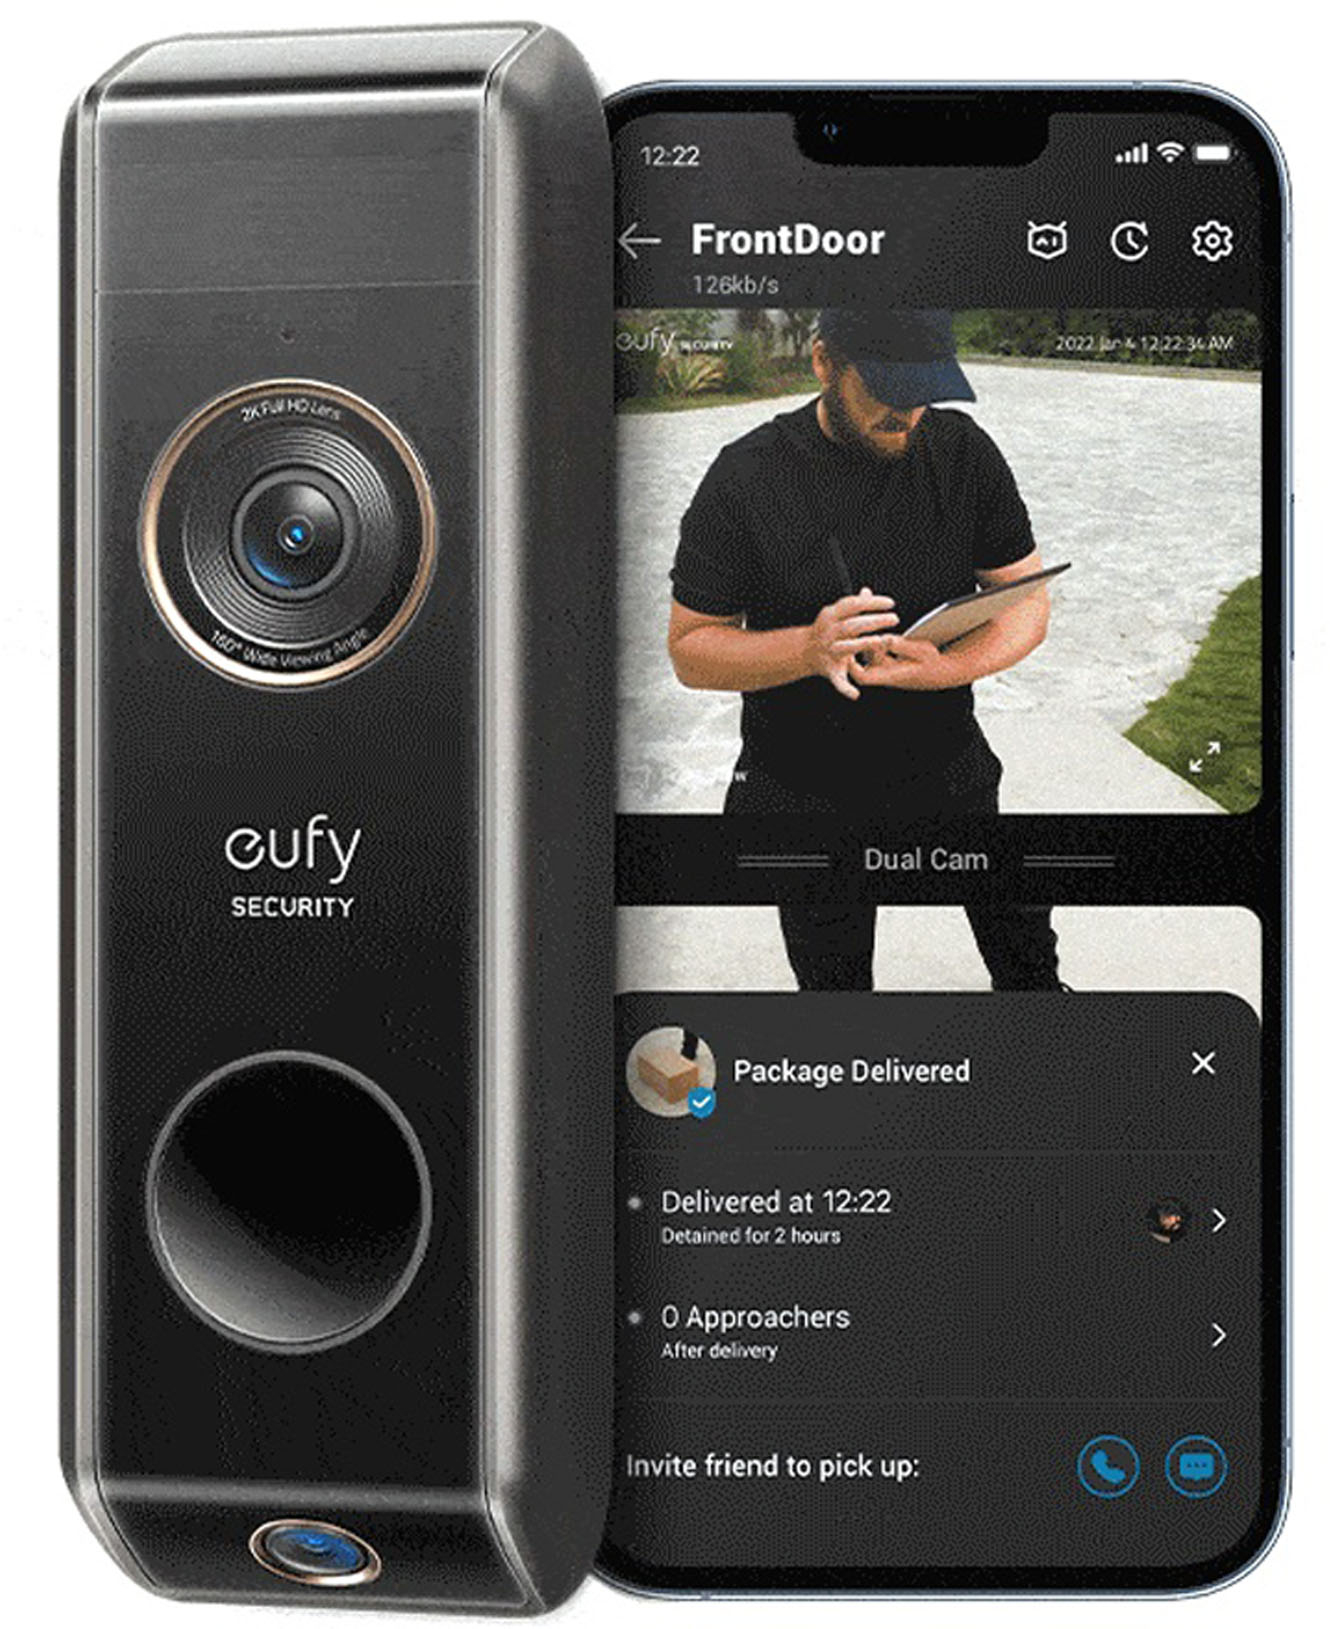 eufy Security 2K Wi-Fi Battery-Powered Video Doorbell T8212111